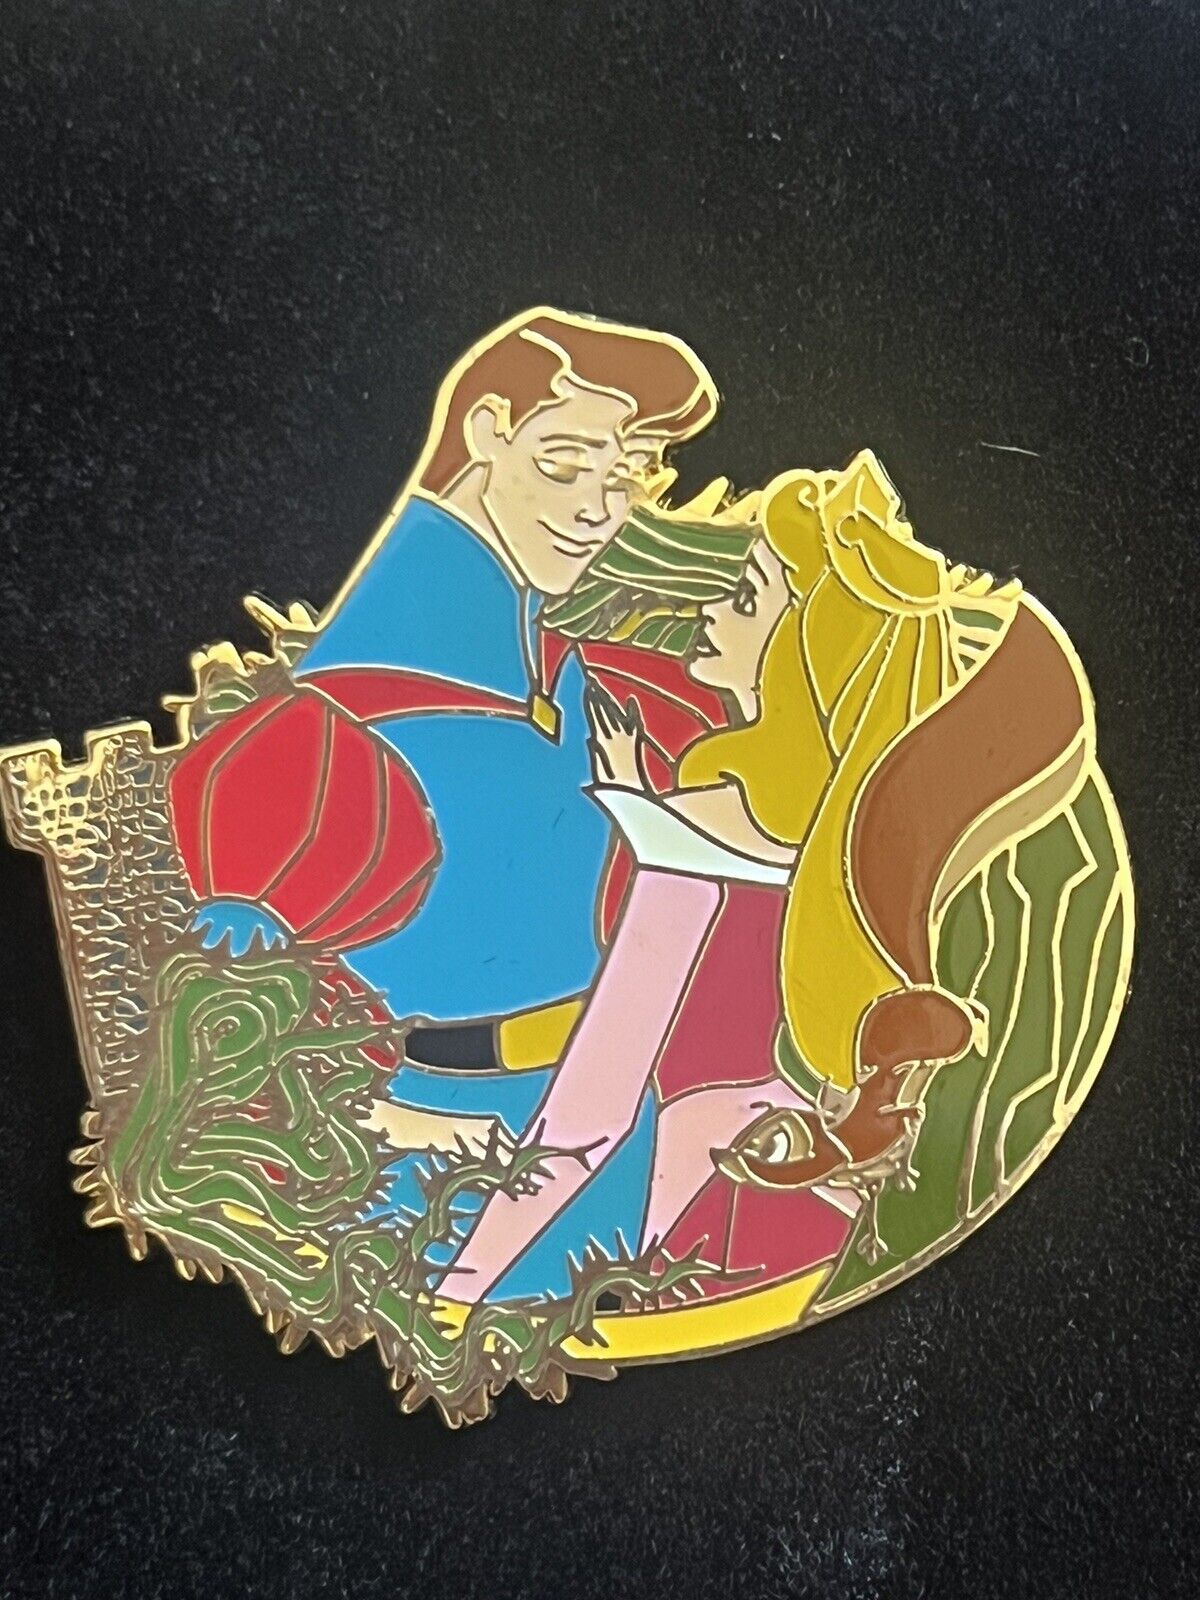 RARE DISNEY PIN 2010 SLEEPING BEAUTY & PRINCE CHARMING HAPPILY EVER AFTER LE 250